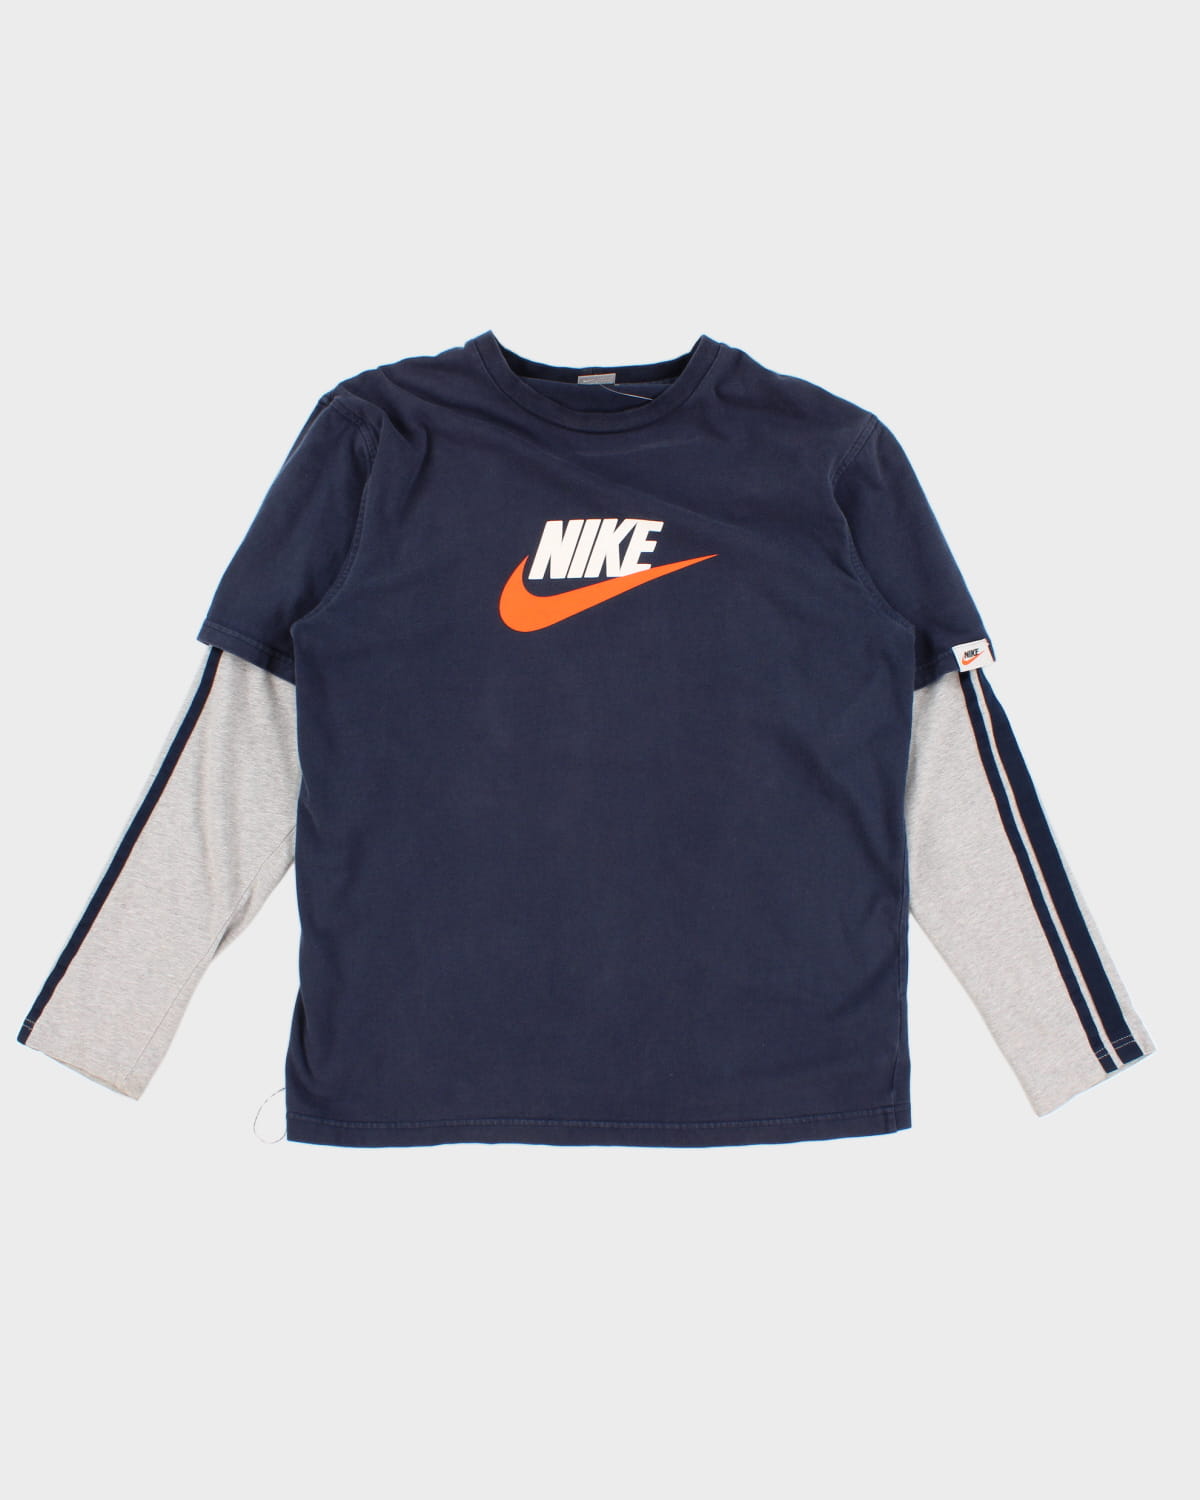 Dads 00's Nike Long sleeve - L